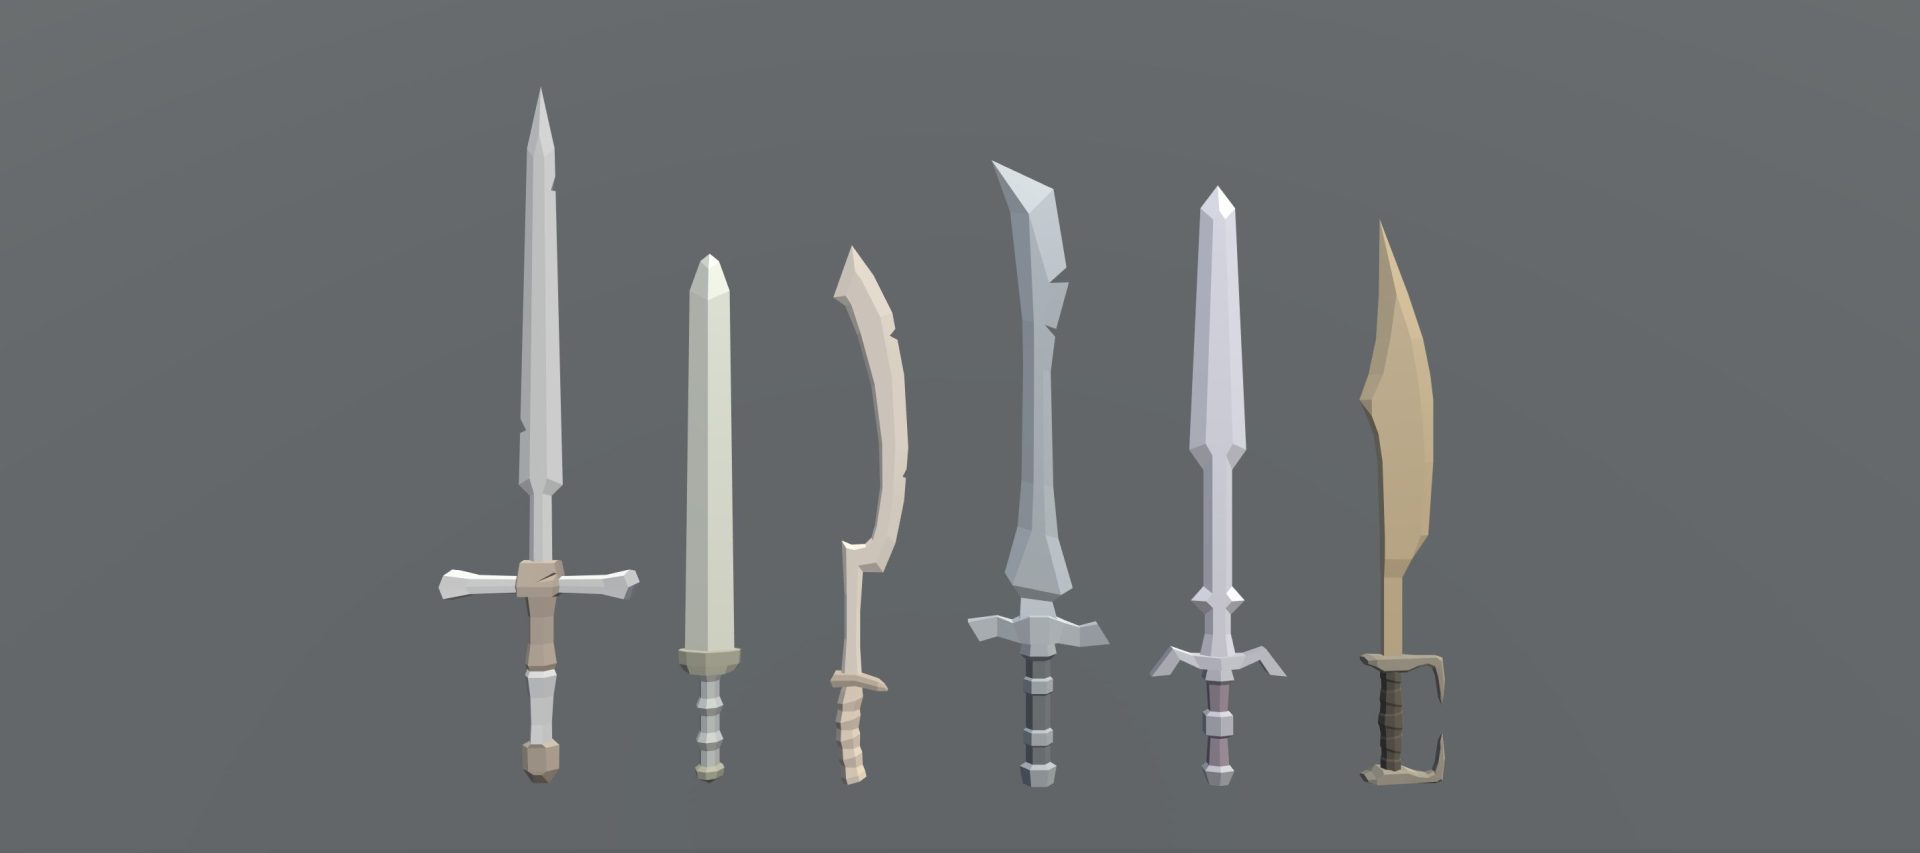 weapons 1